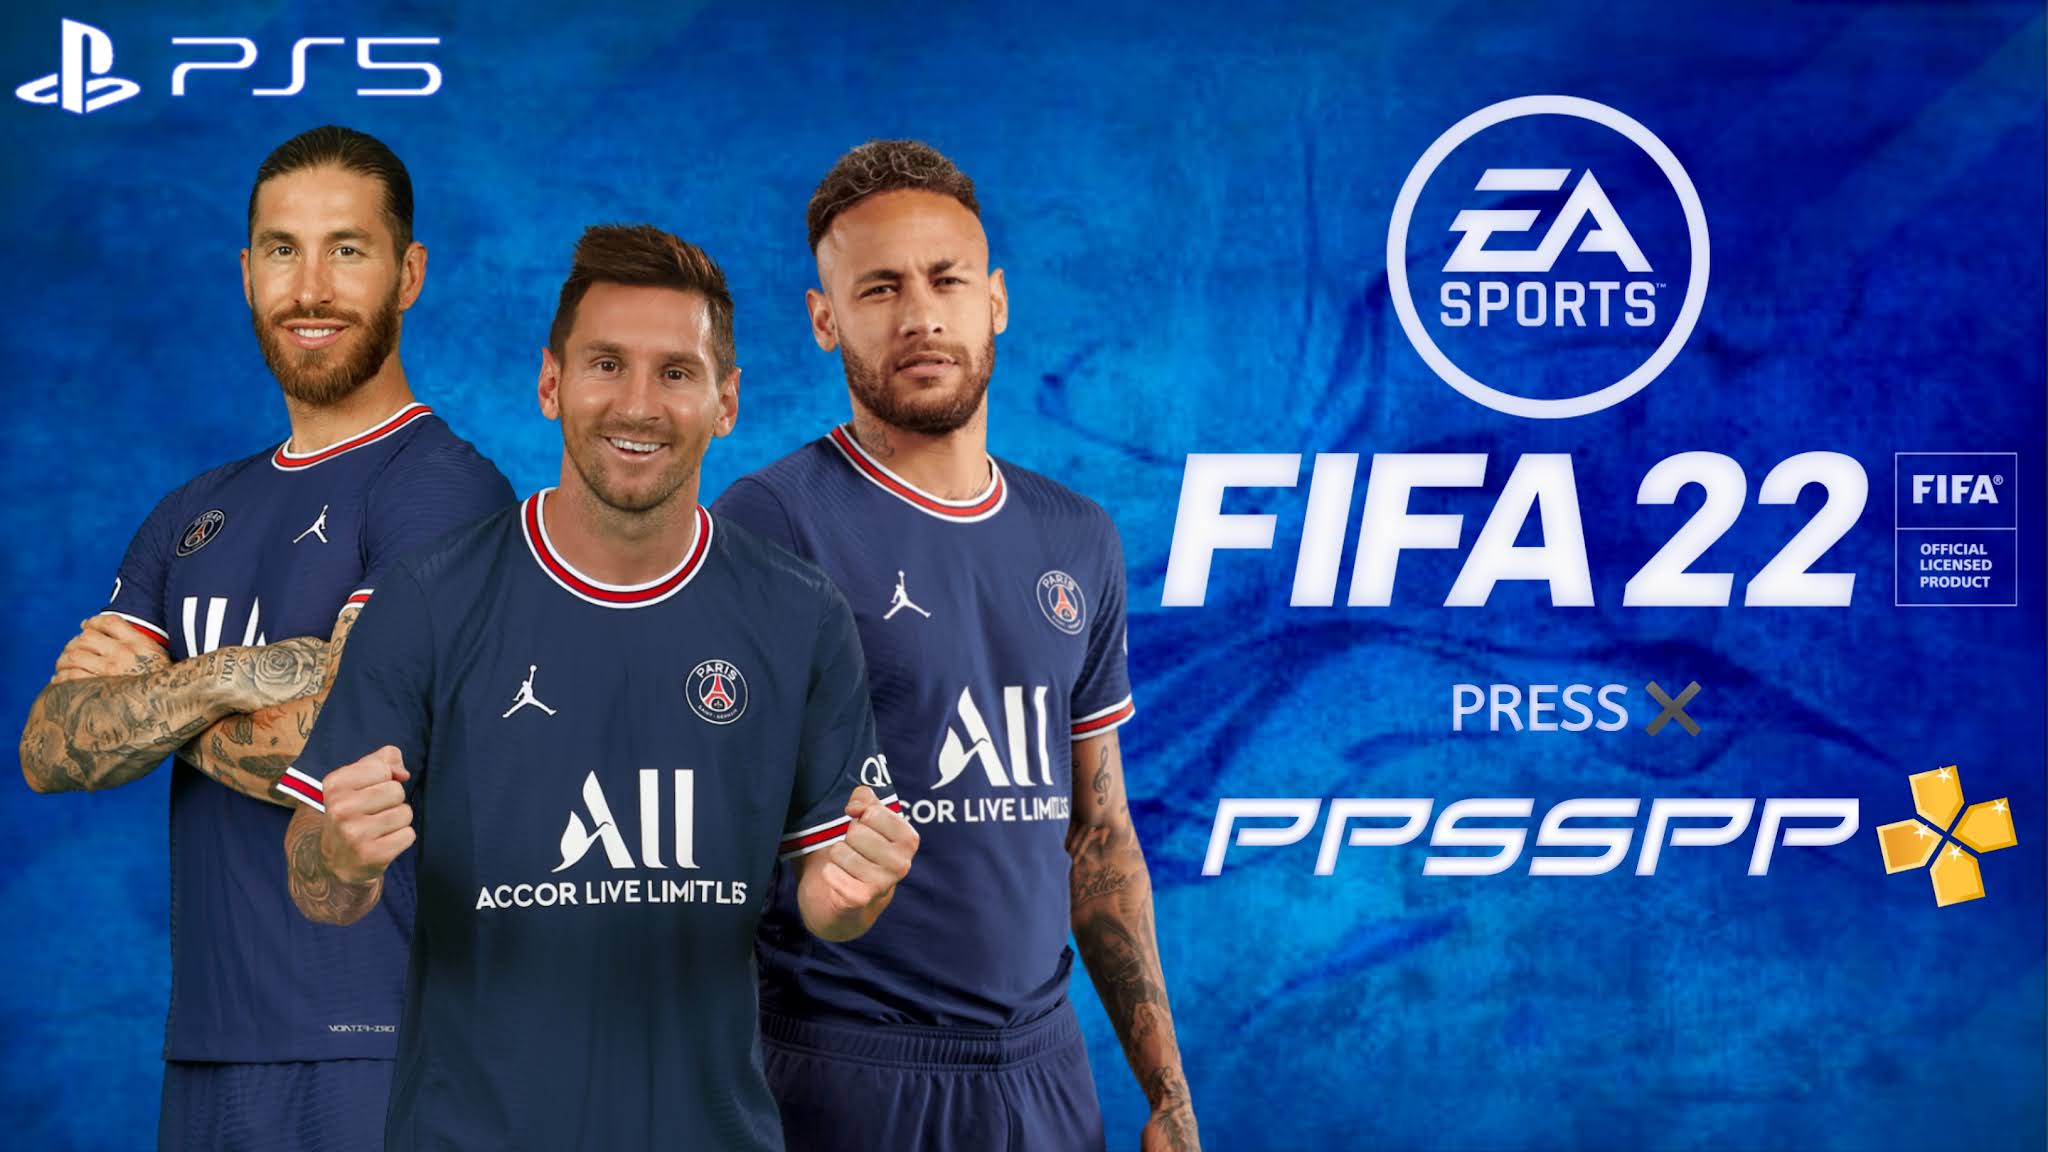 ppsspp fifa 22